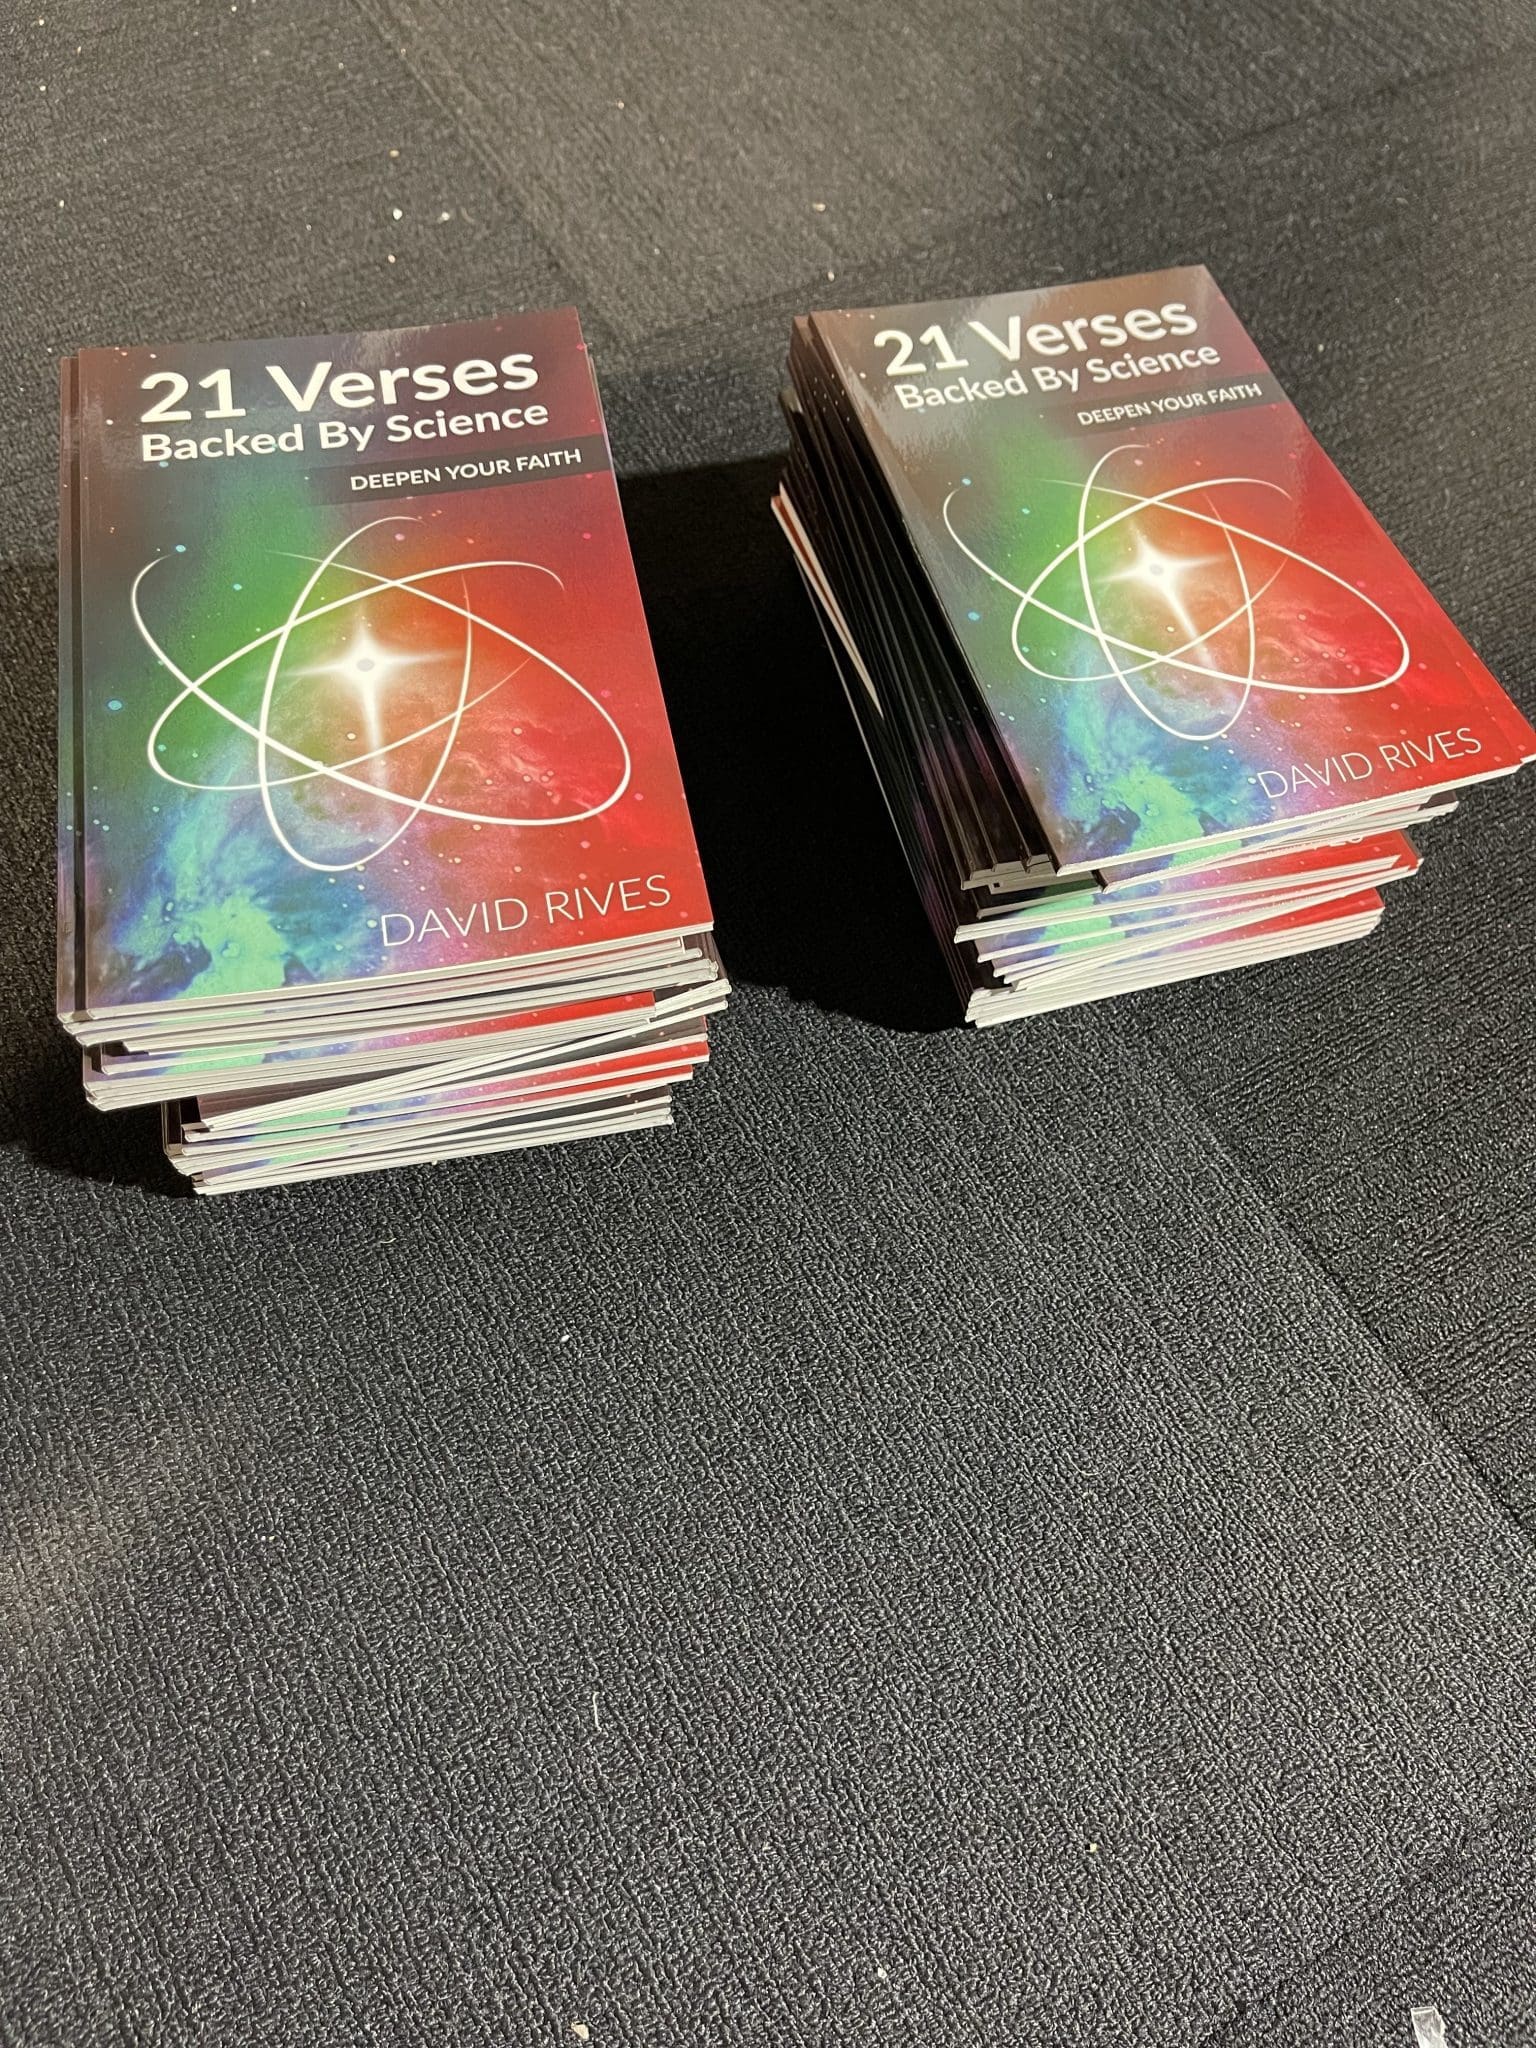 21 Verses Backed By Science - BIBLE KNOWS BEST Book by David Rives | DRM (BULK QUANTITY 100 COPIES)